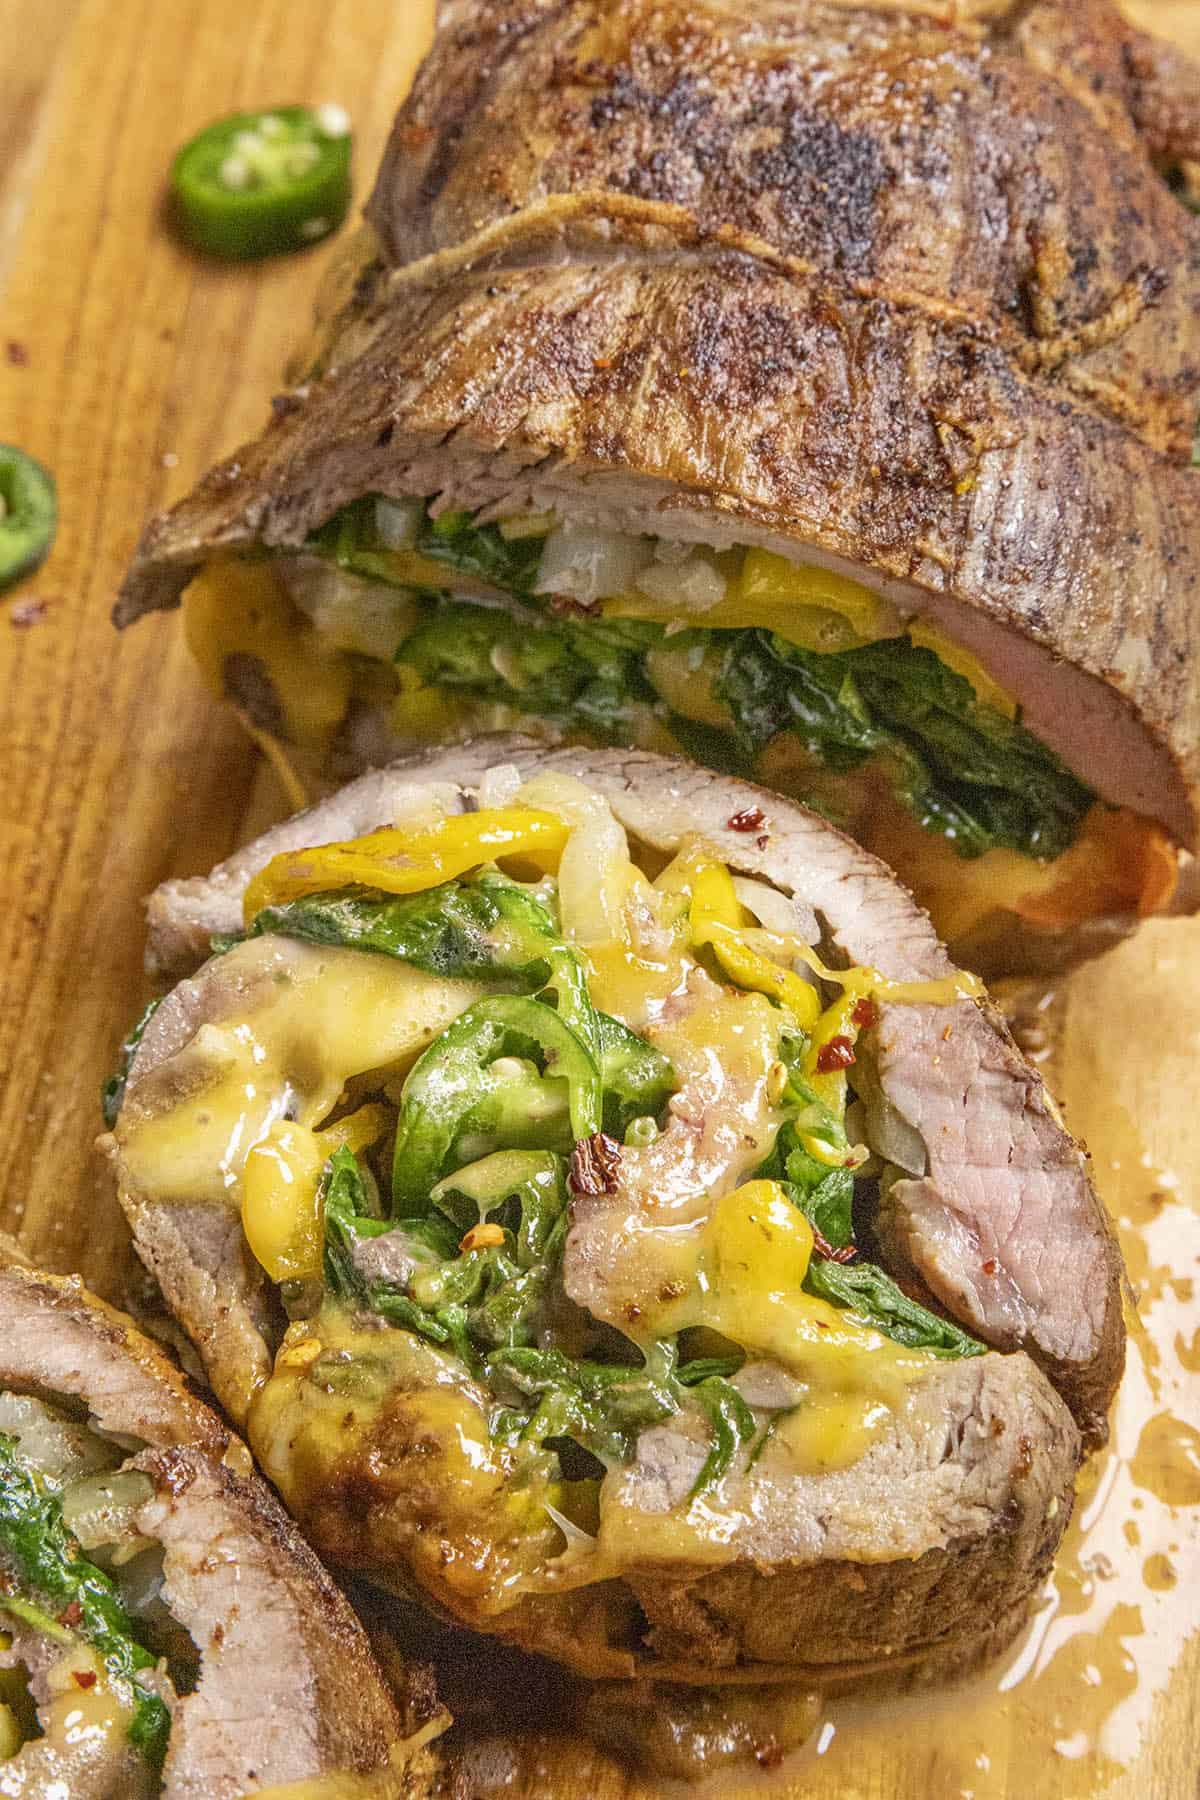 Spinach, Cheese and Chili Stuffed Flank Steak Recipe